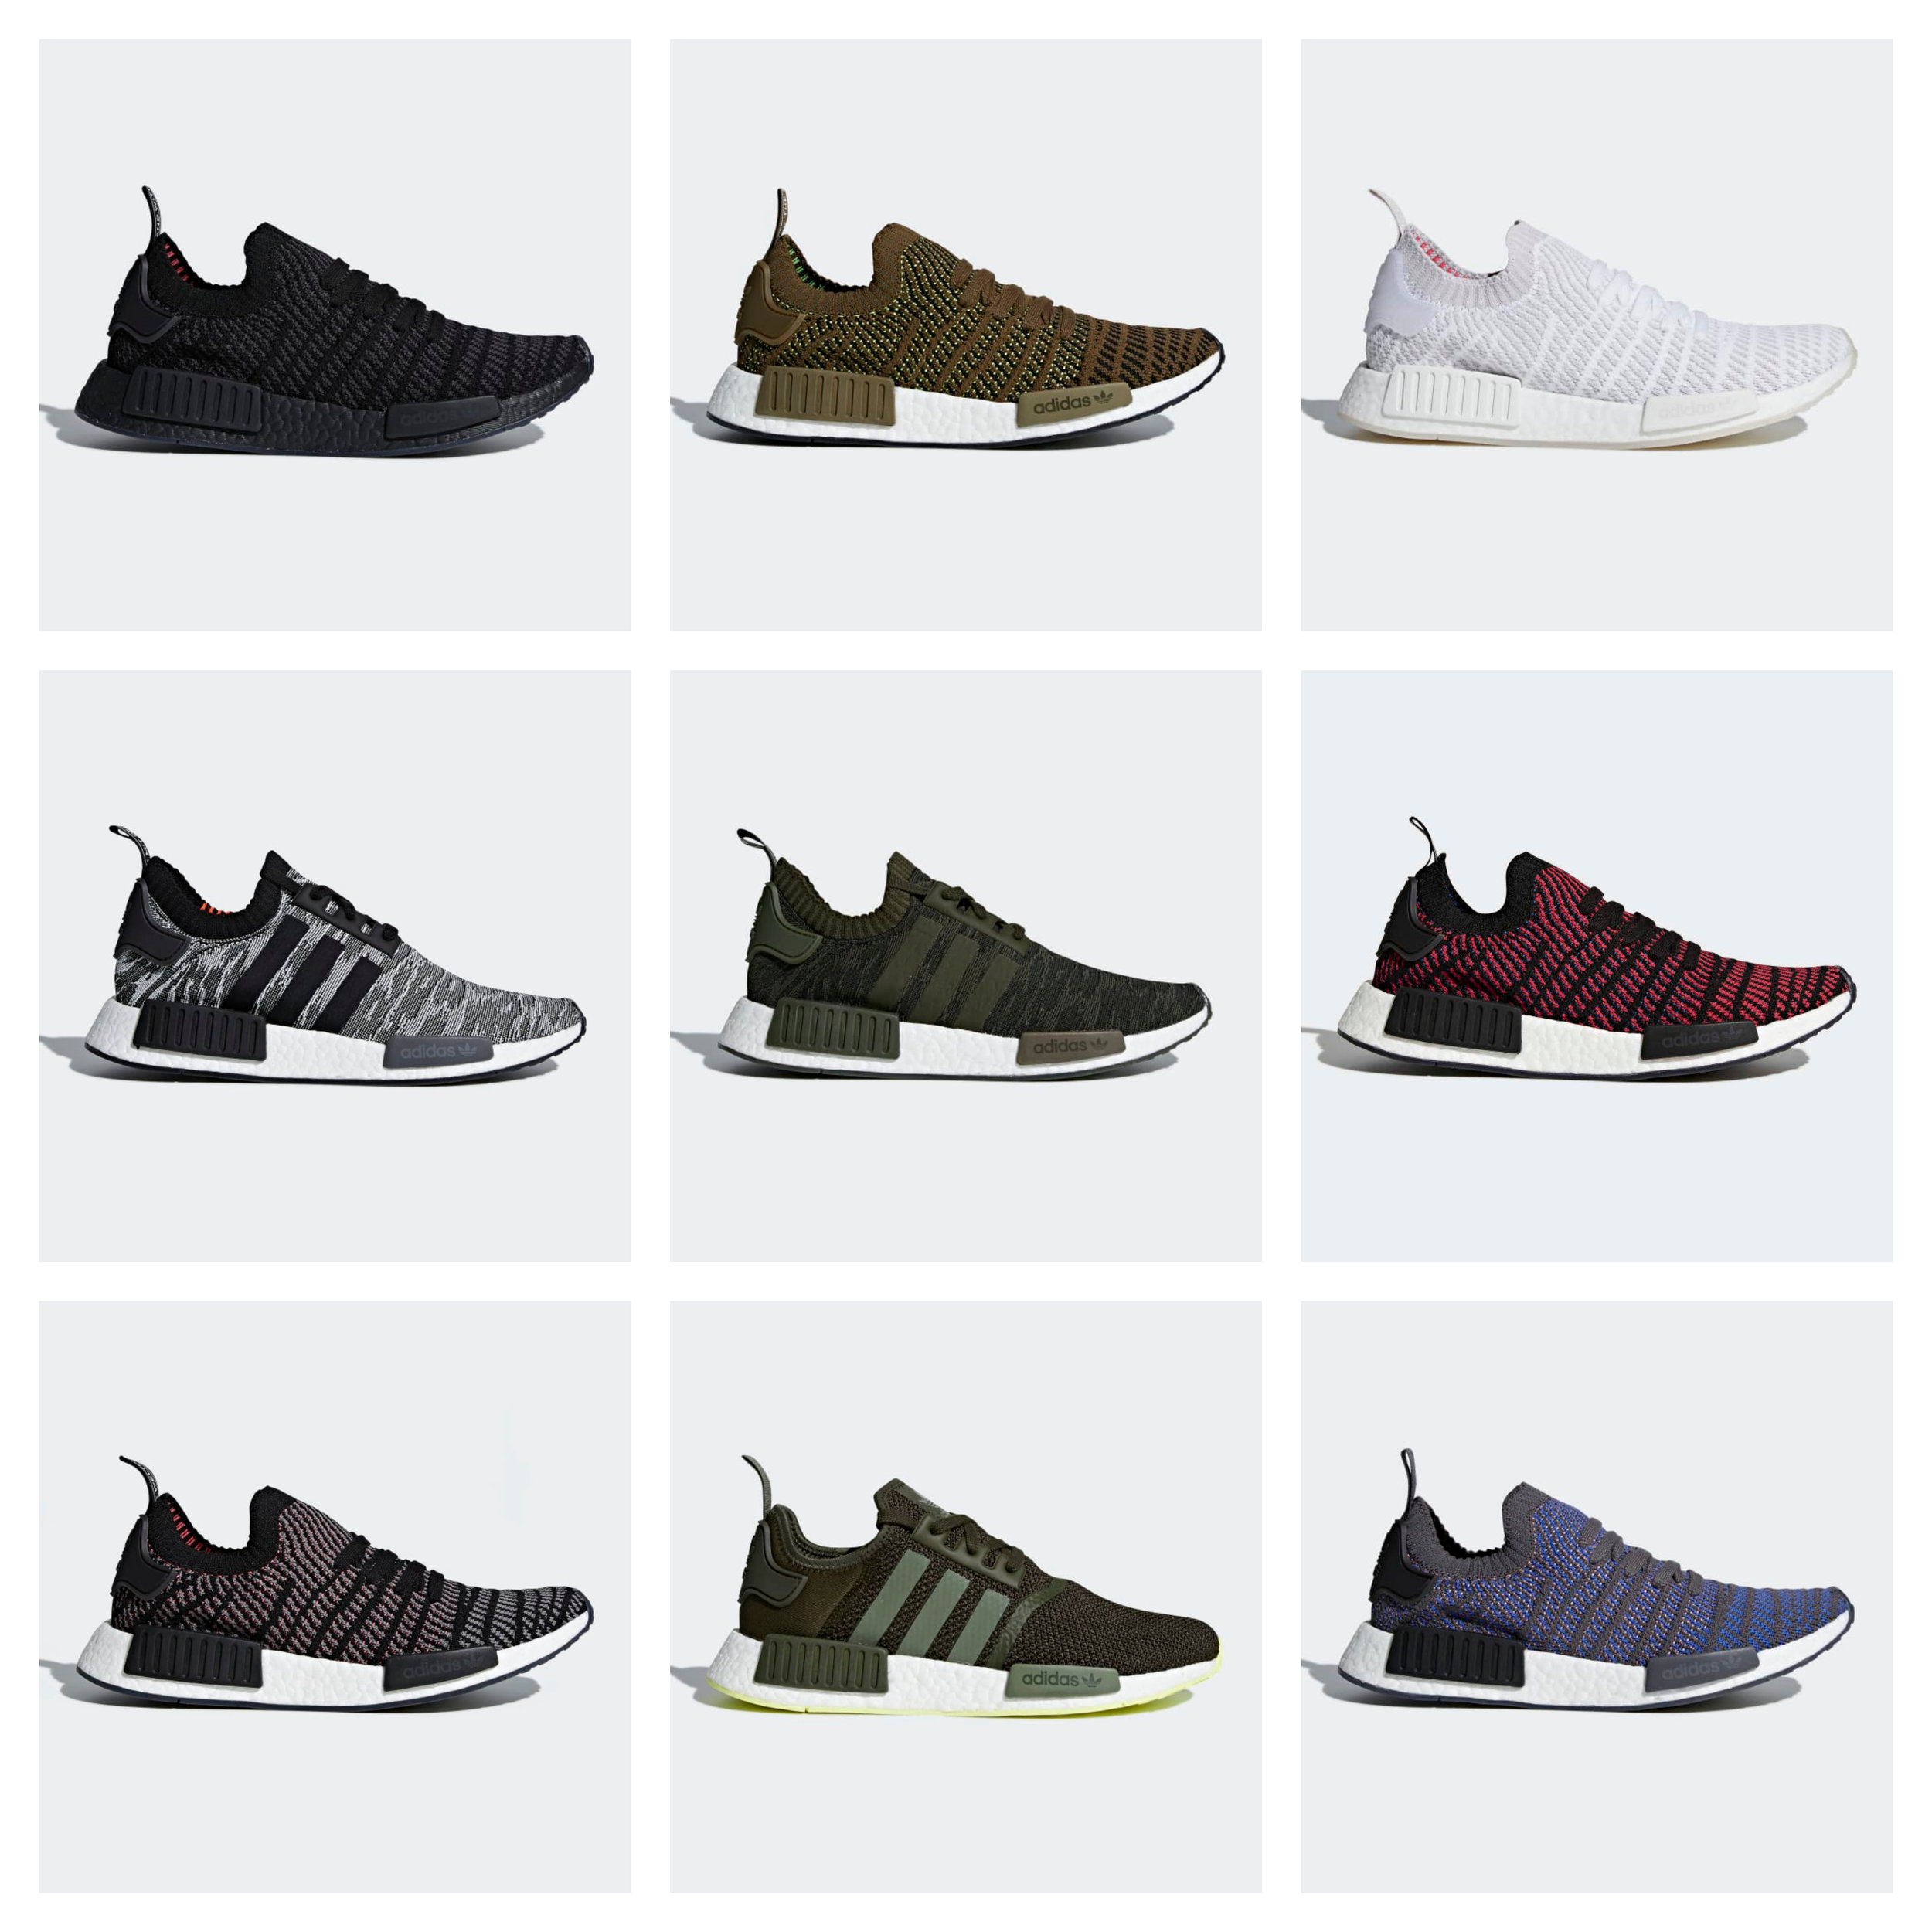 adidas NMD R1 Colorways — Sneaker Shouts